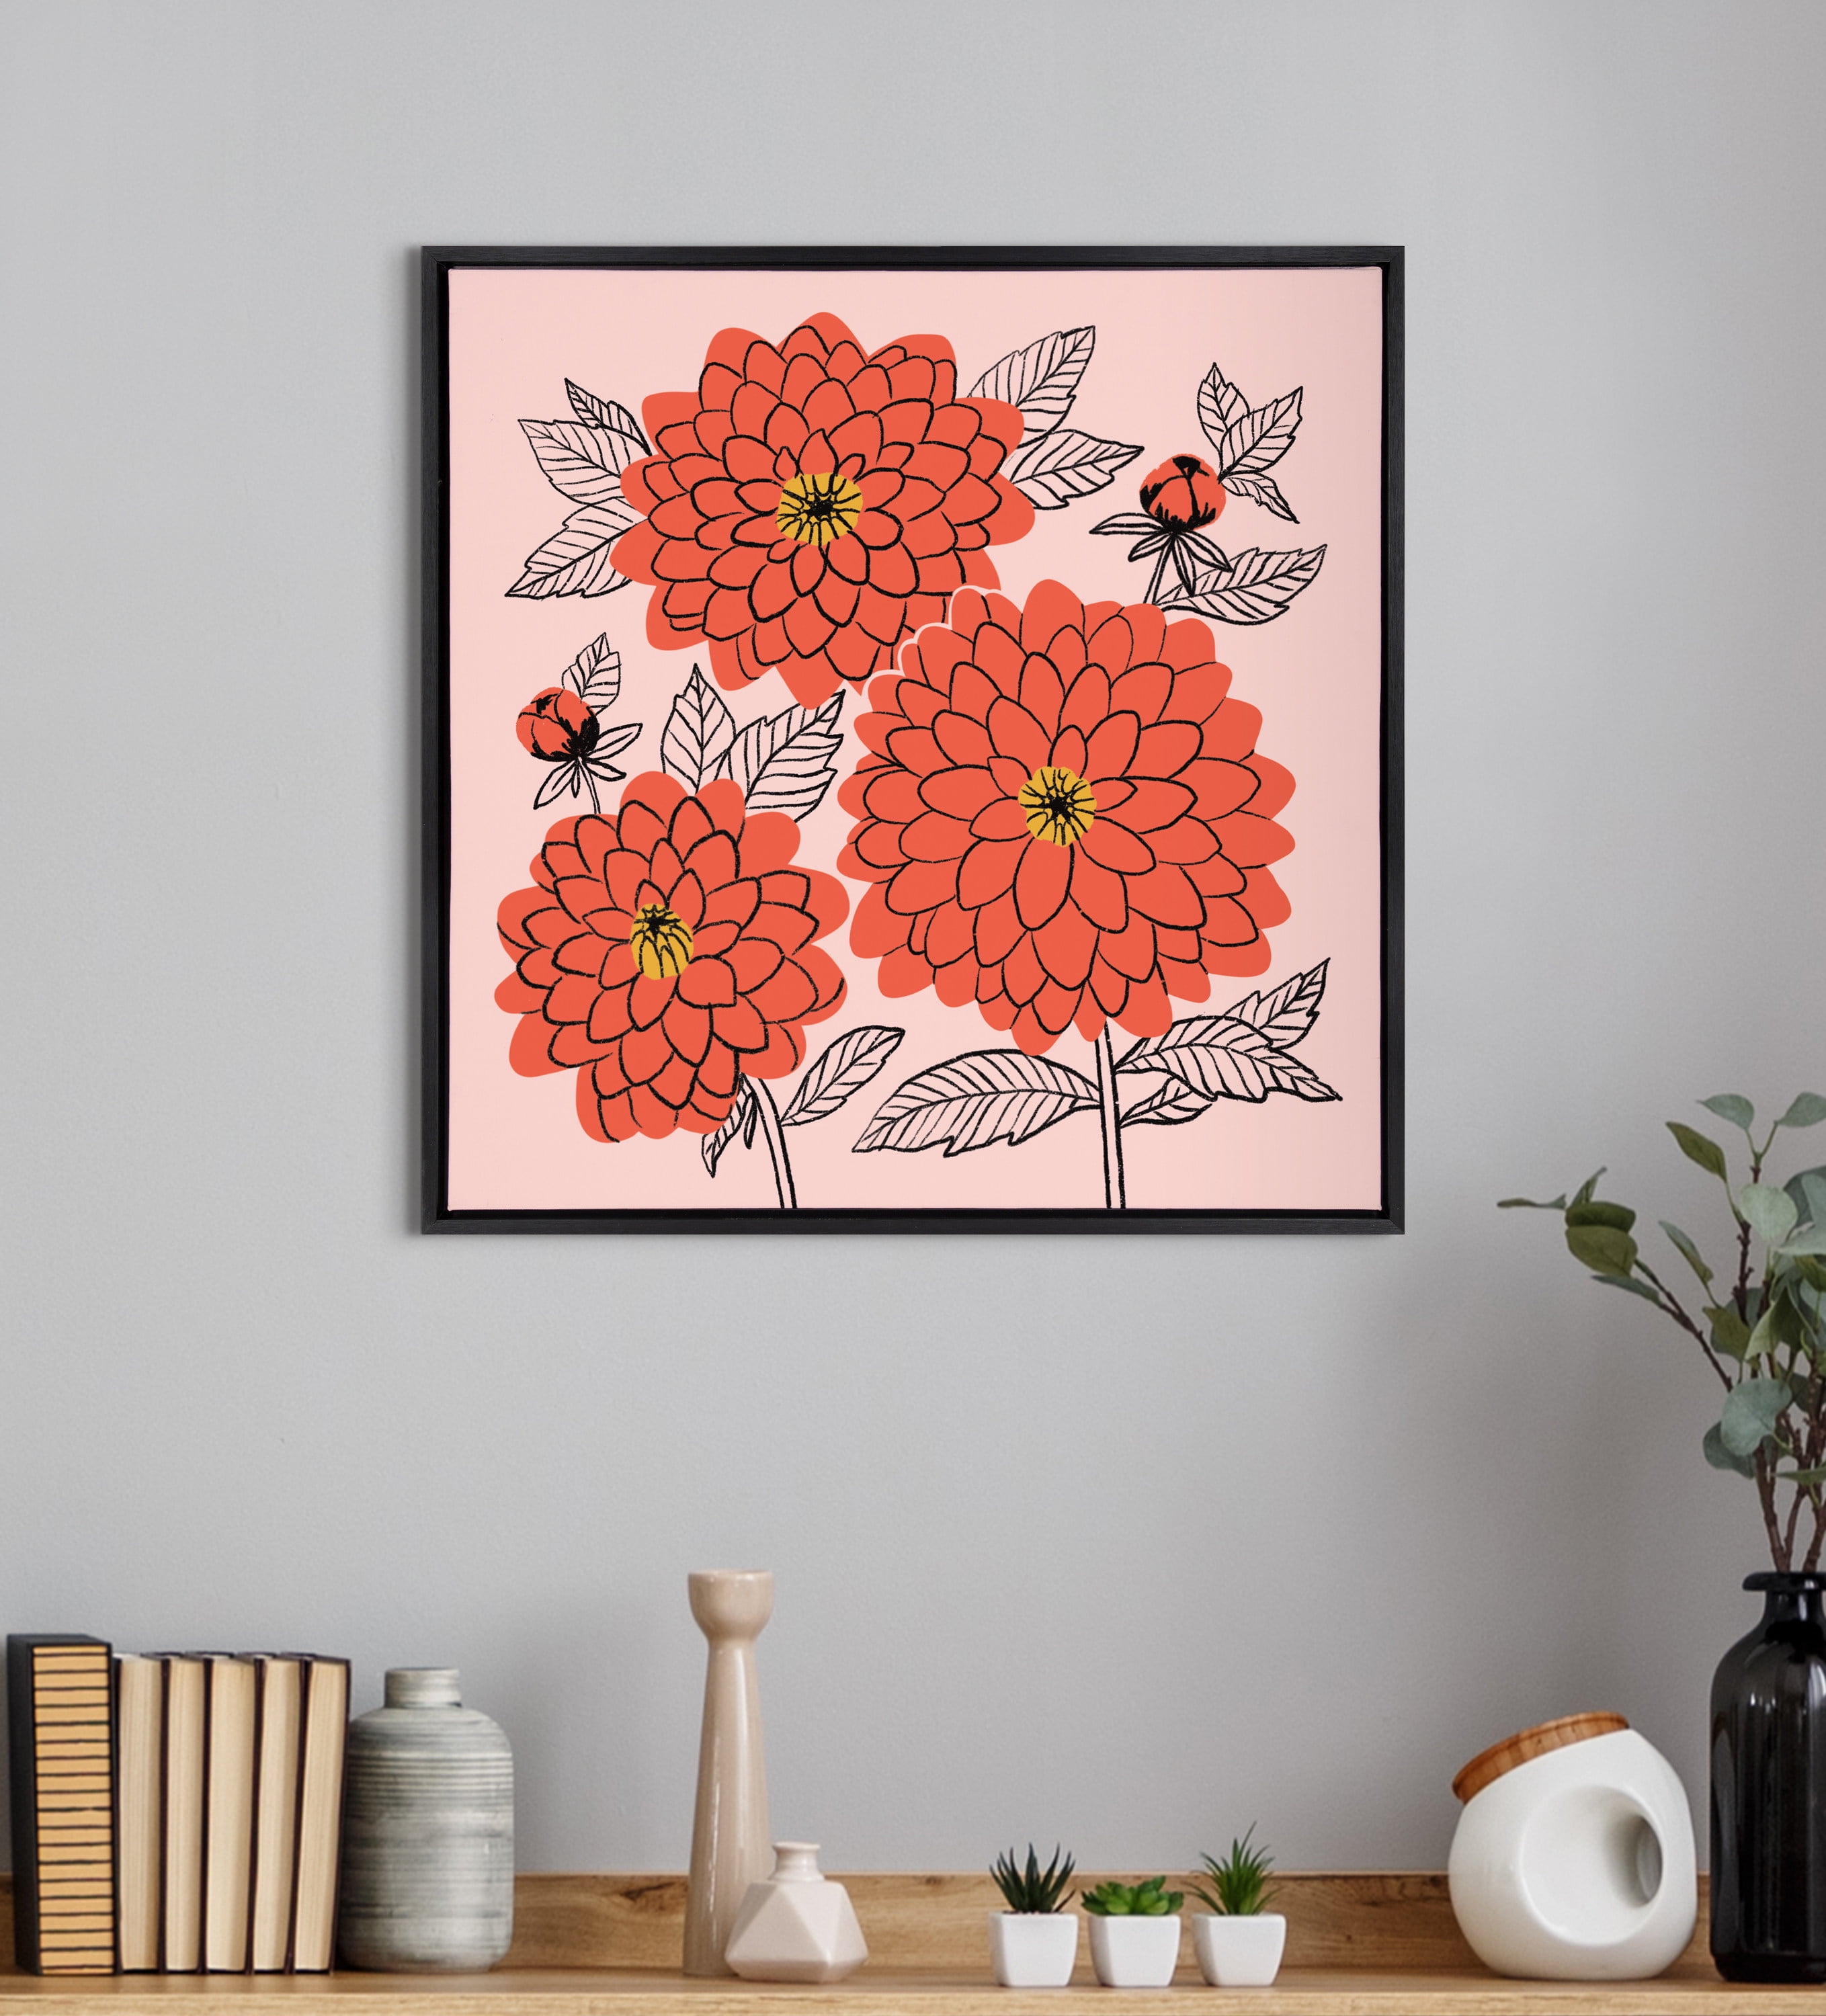 Kate and Laurel Sylvie Sketchy Dahlias Framed Canvas Wall Art by Maria Filar,  24x24 Black, Chic Floral Art for Wall